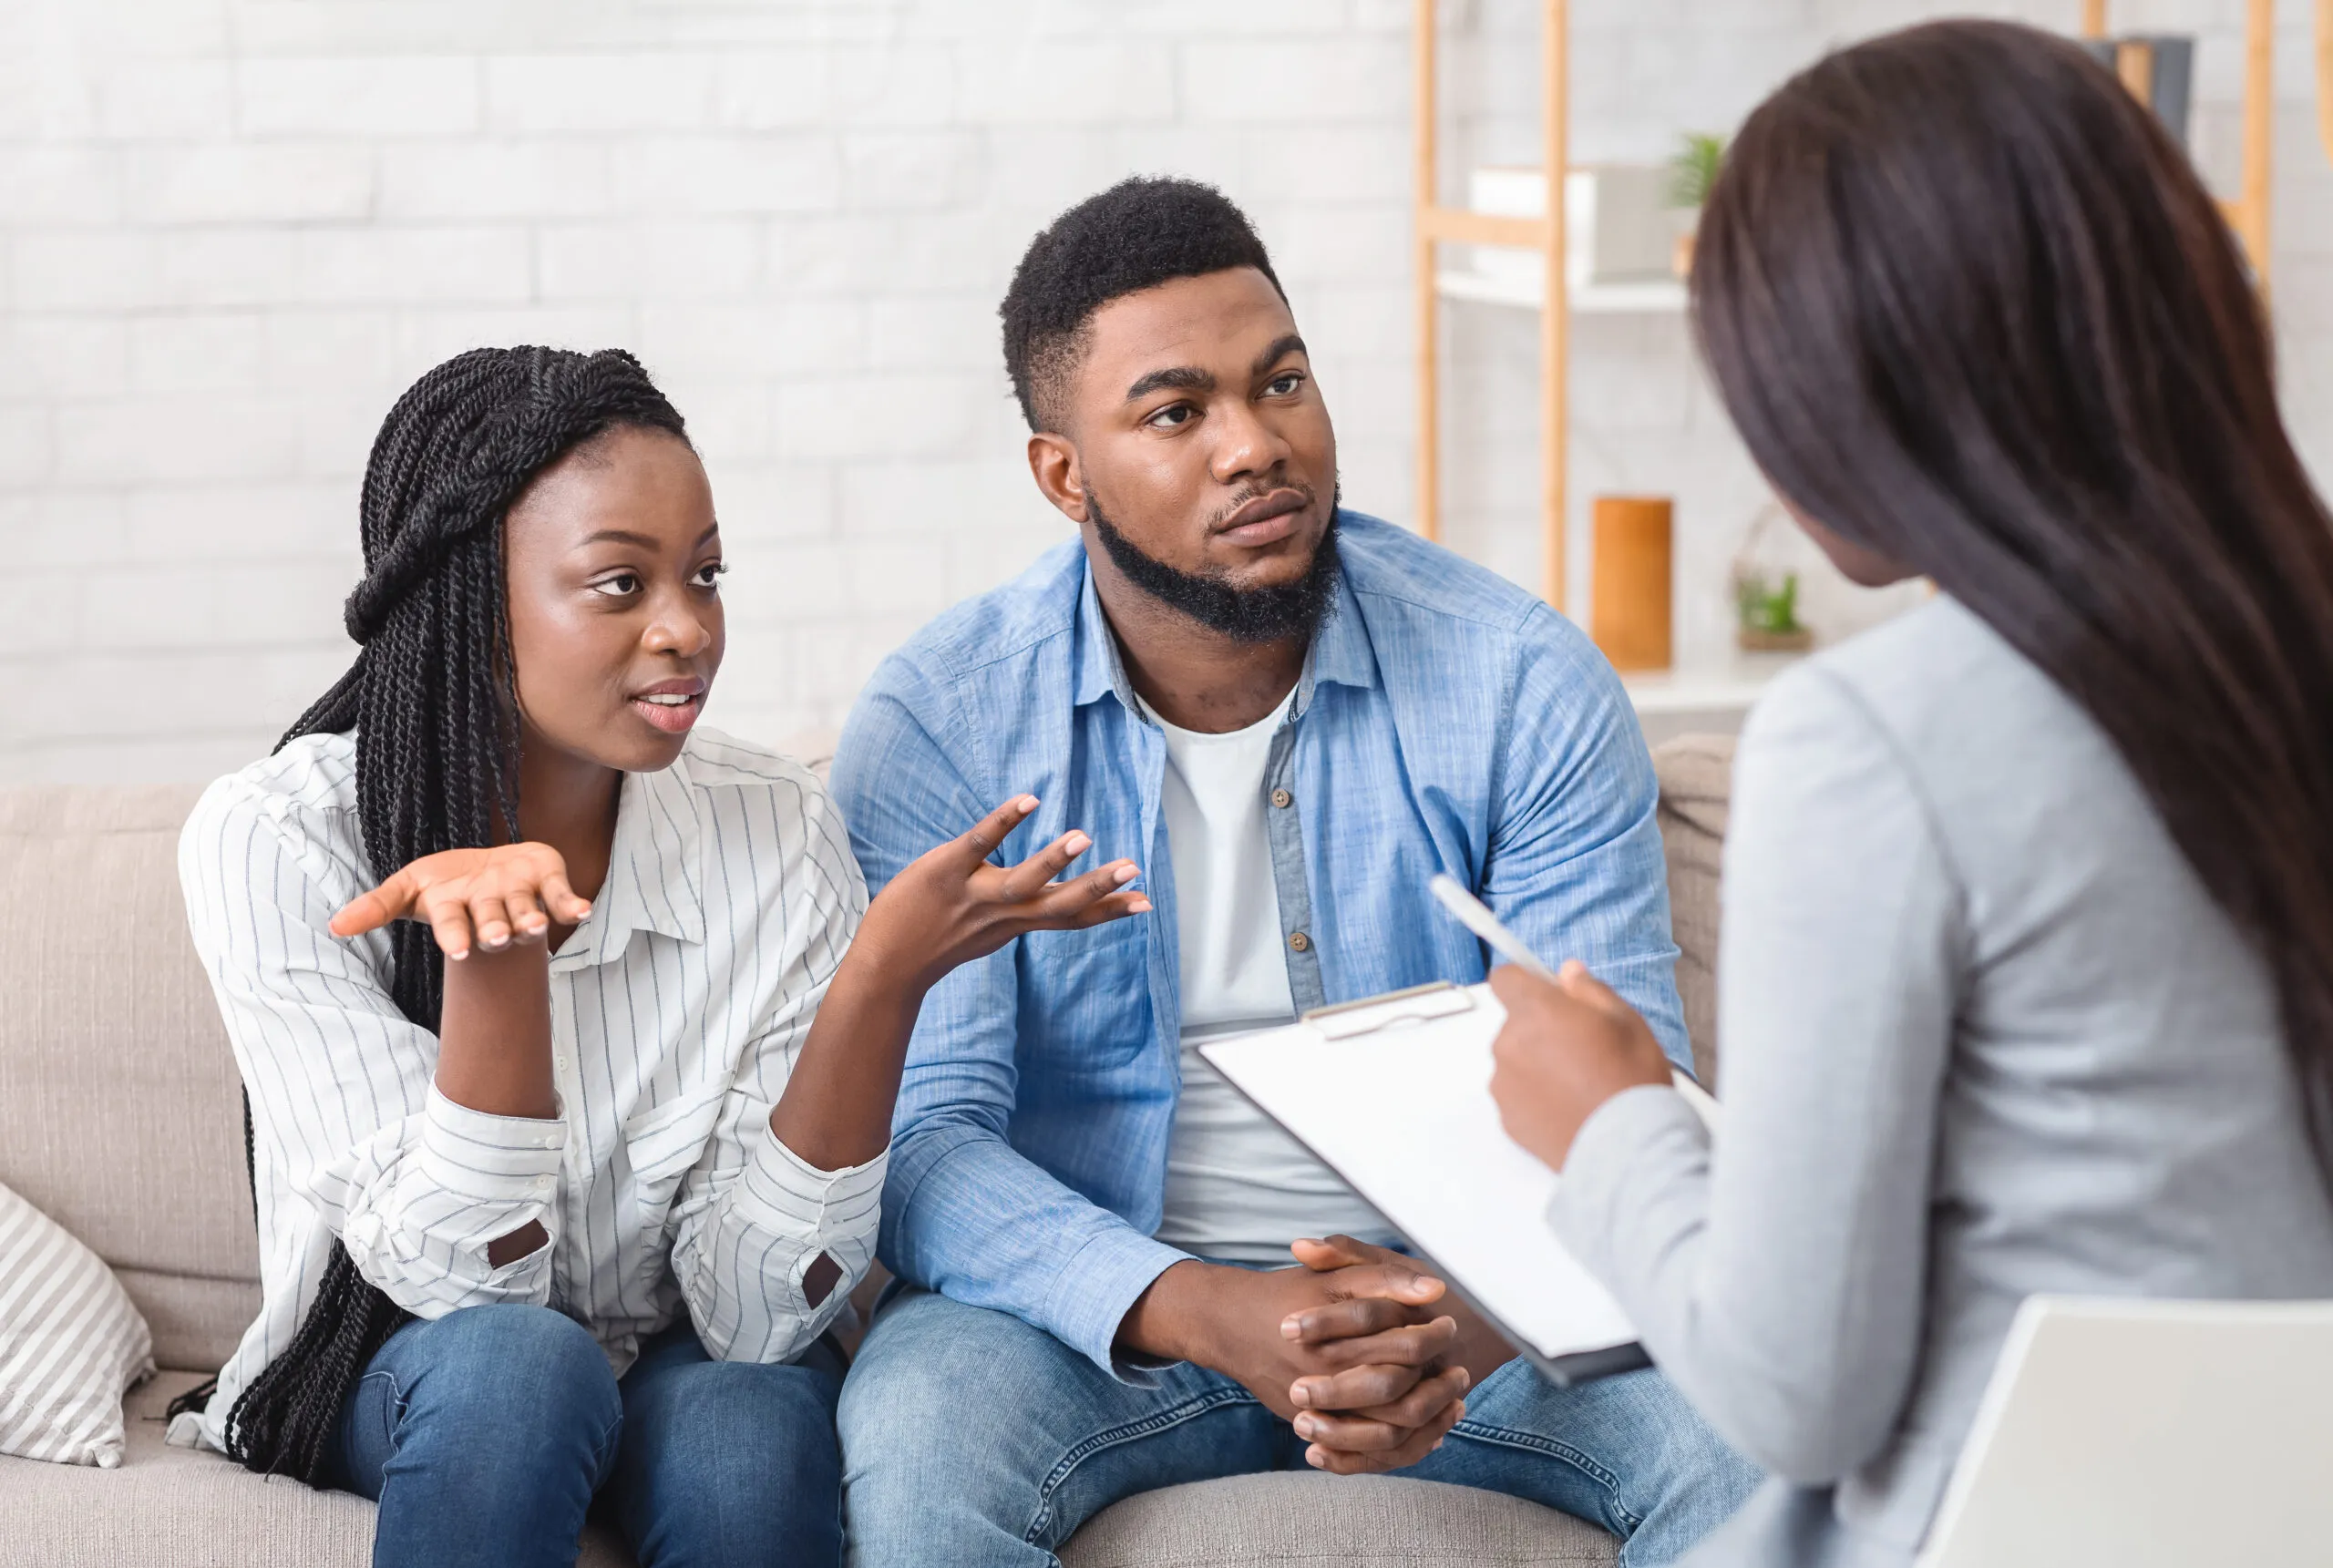 Bm1, black marriage counseling, how black couples therapy helps relationships